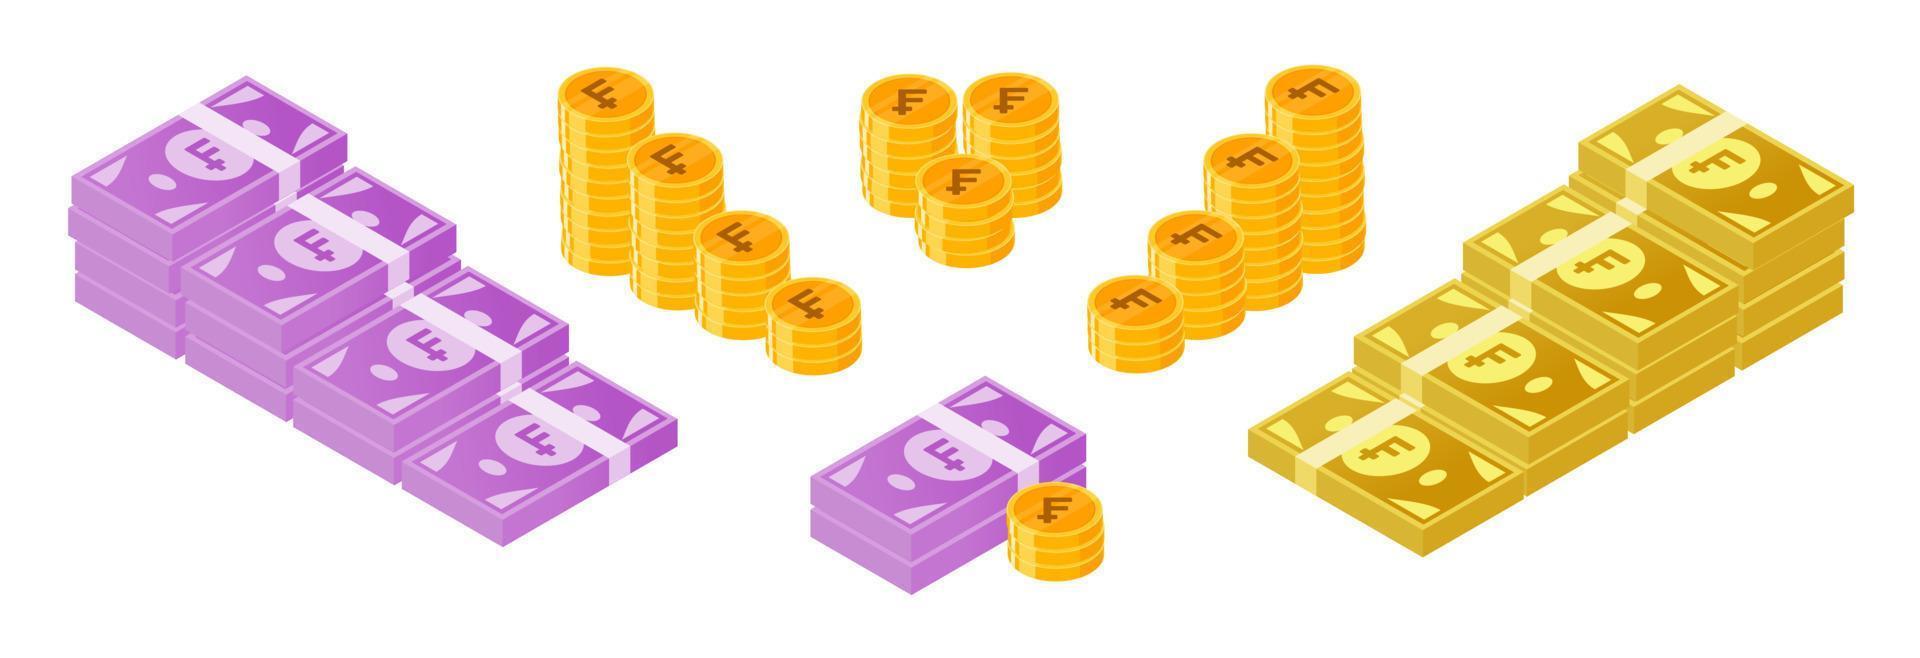 Swiss Franc Money and Coin Bundle Set vector